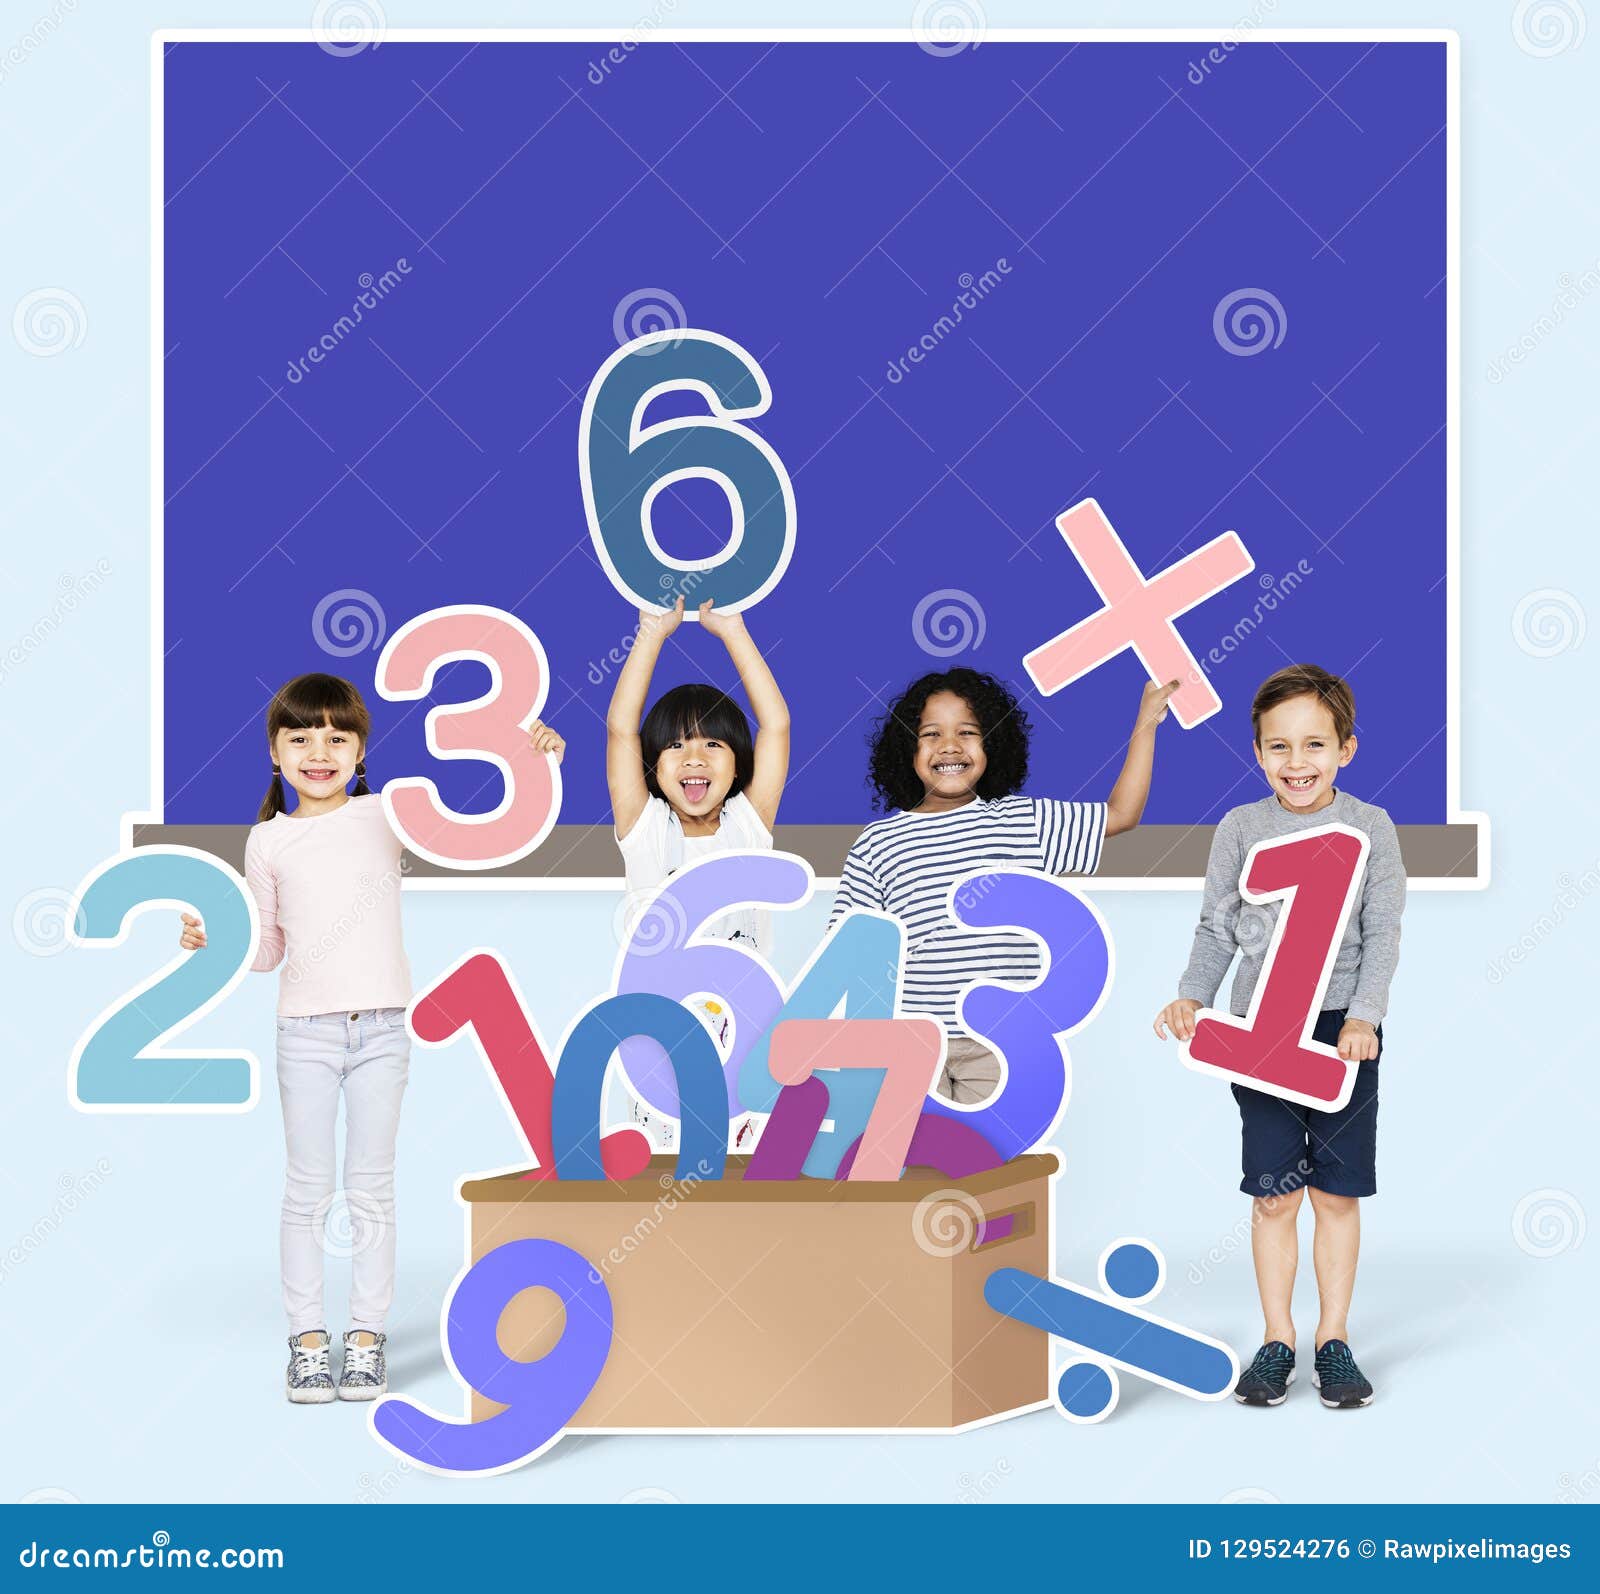 school kids learning mathematics with numbers